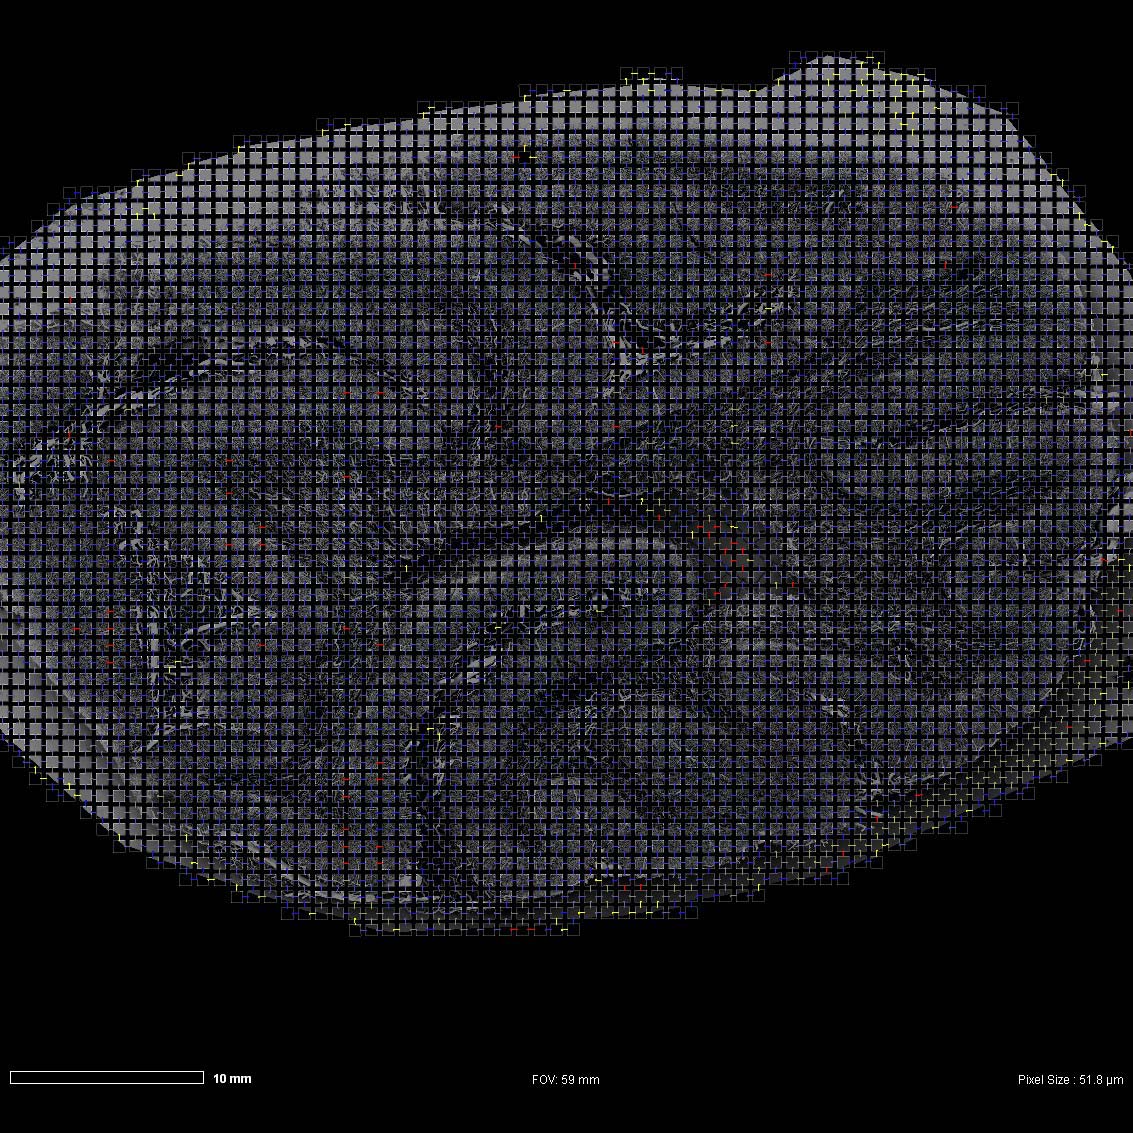 Automatically acquired, large scale image of monkey brain specimen showing brain vasculature. Image captured using Atlas 5 Array Tomography. Field of view: 3700 mm.